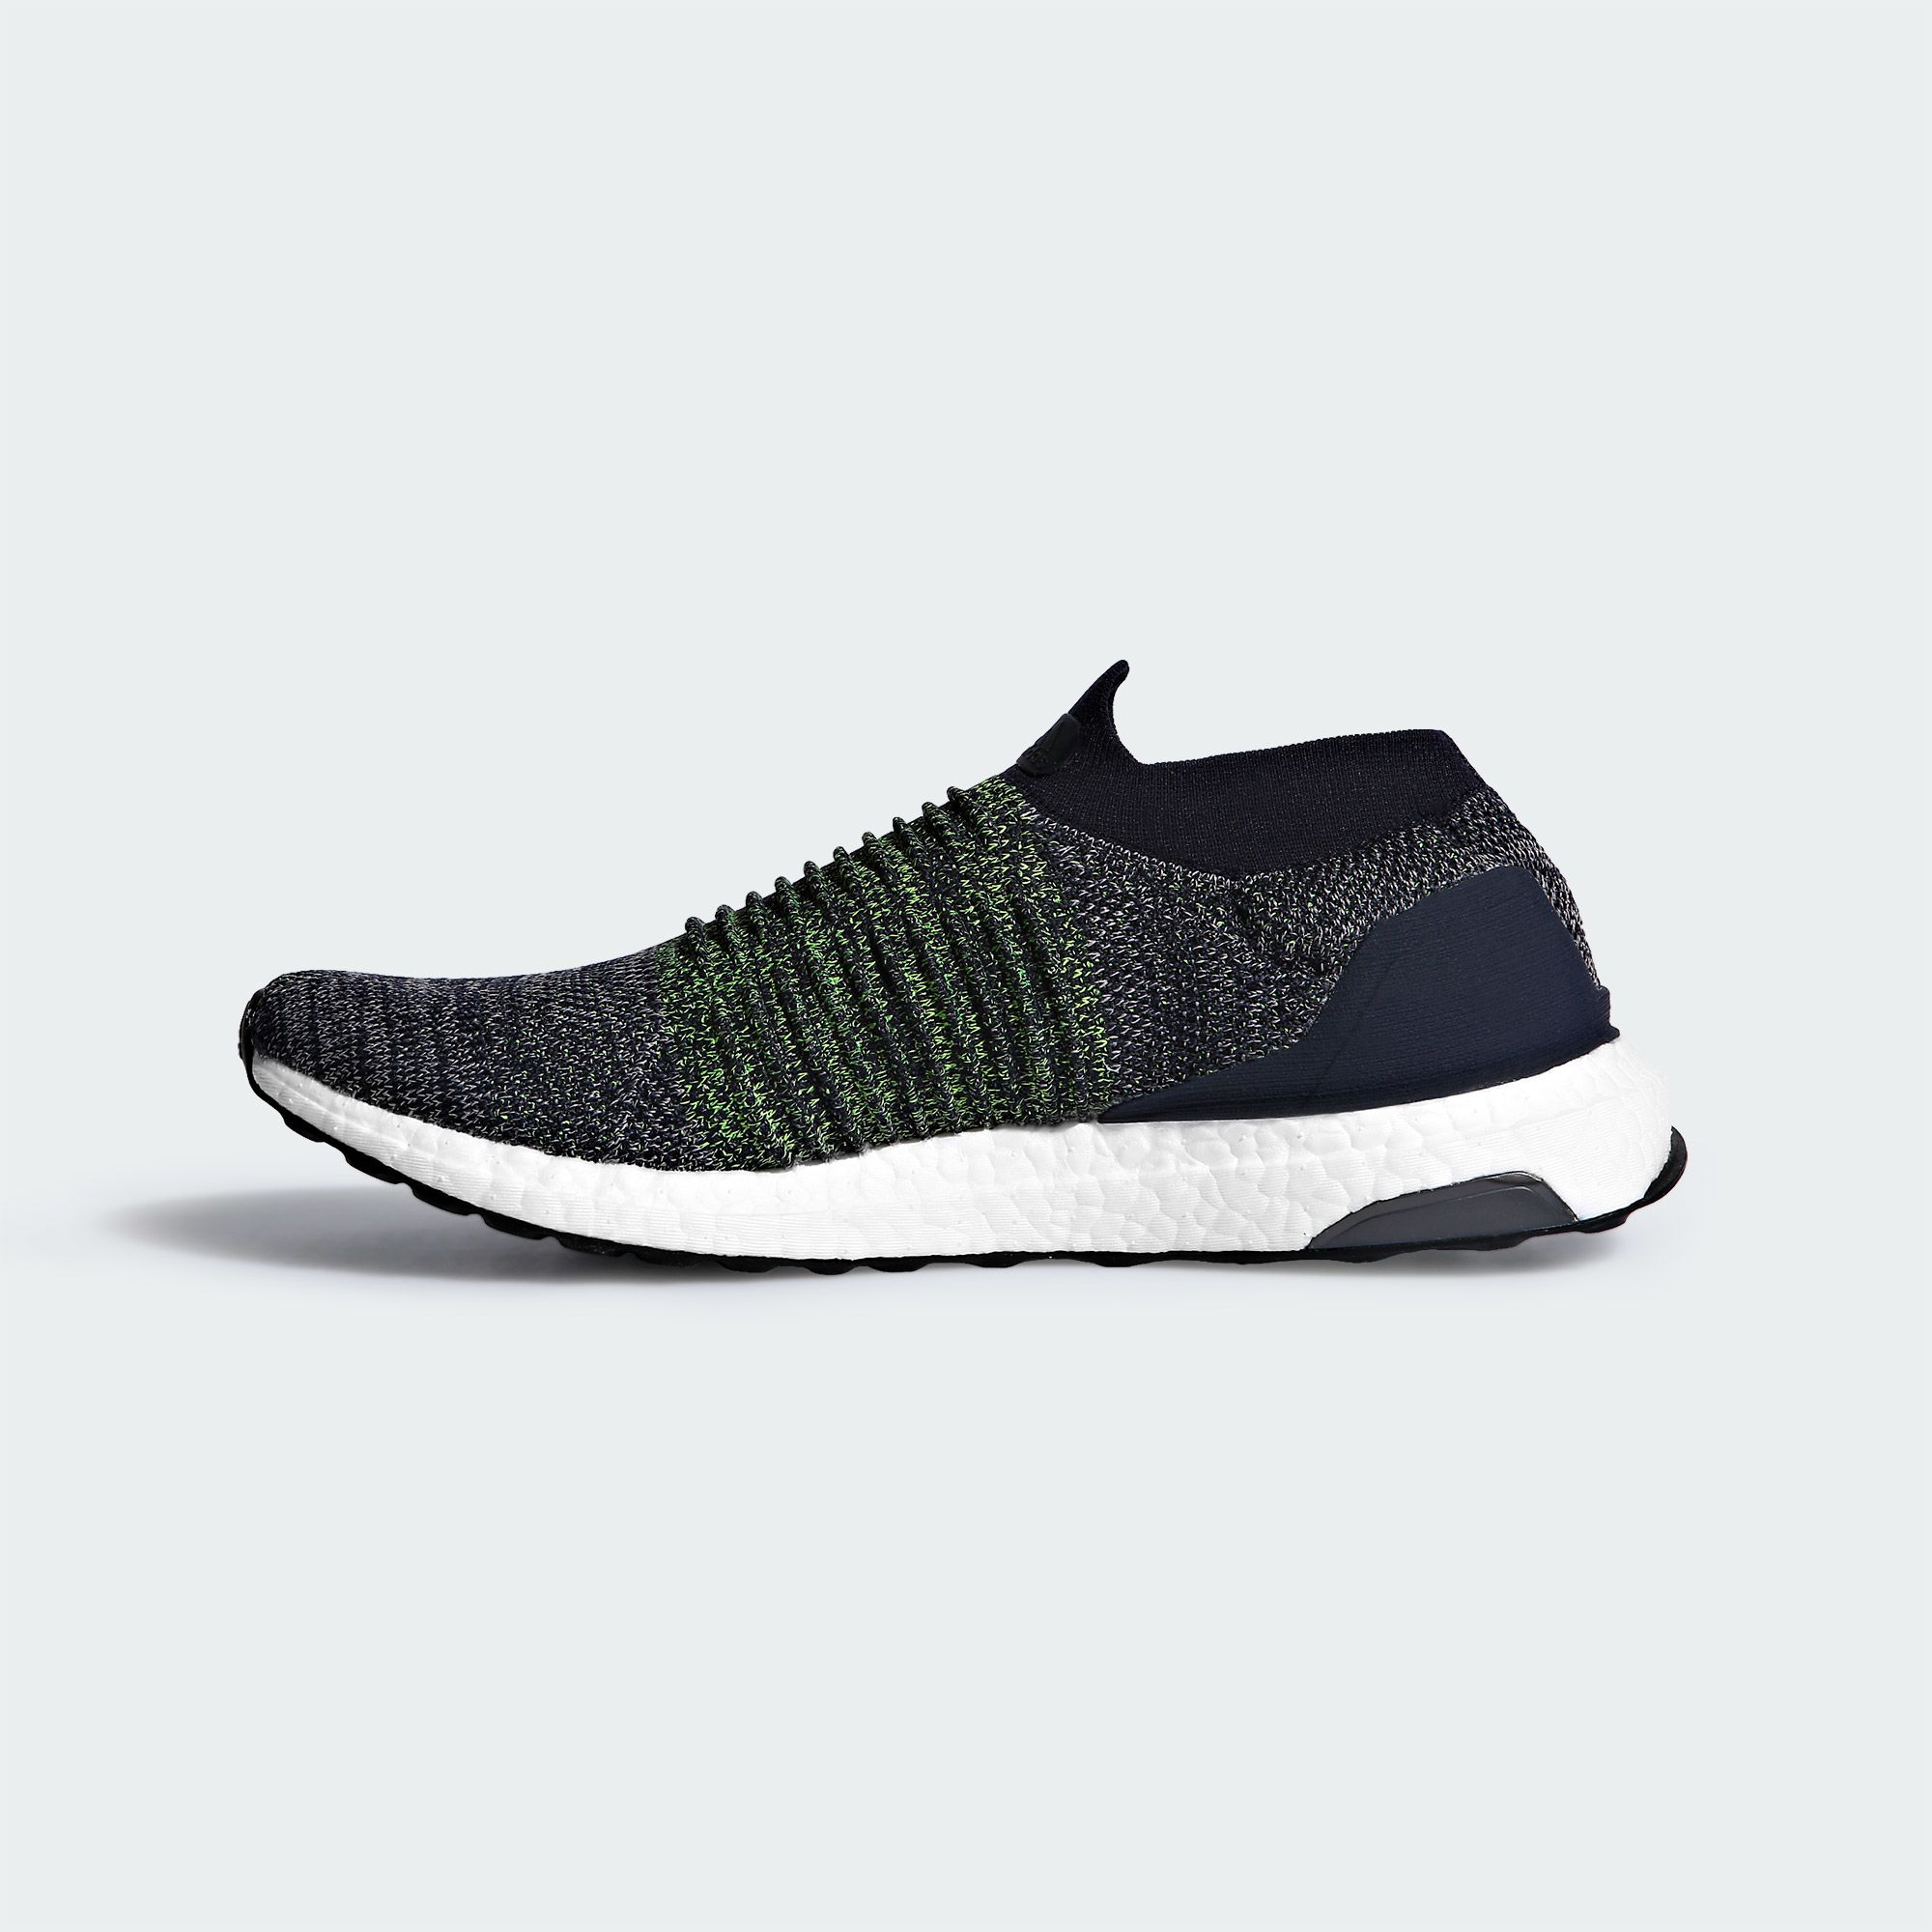 adidas-ultra-boost-laceless-legend-ink-green-4